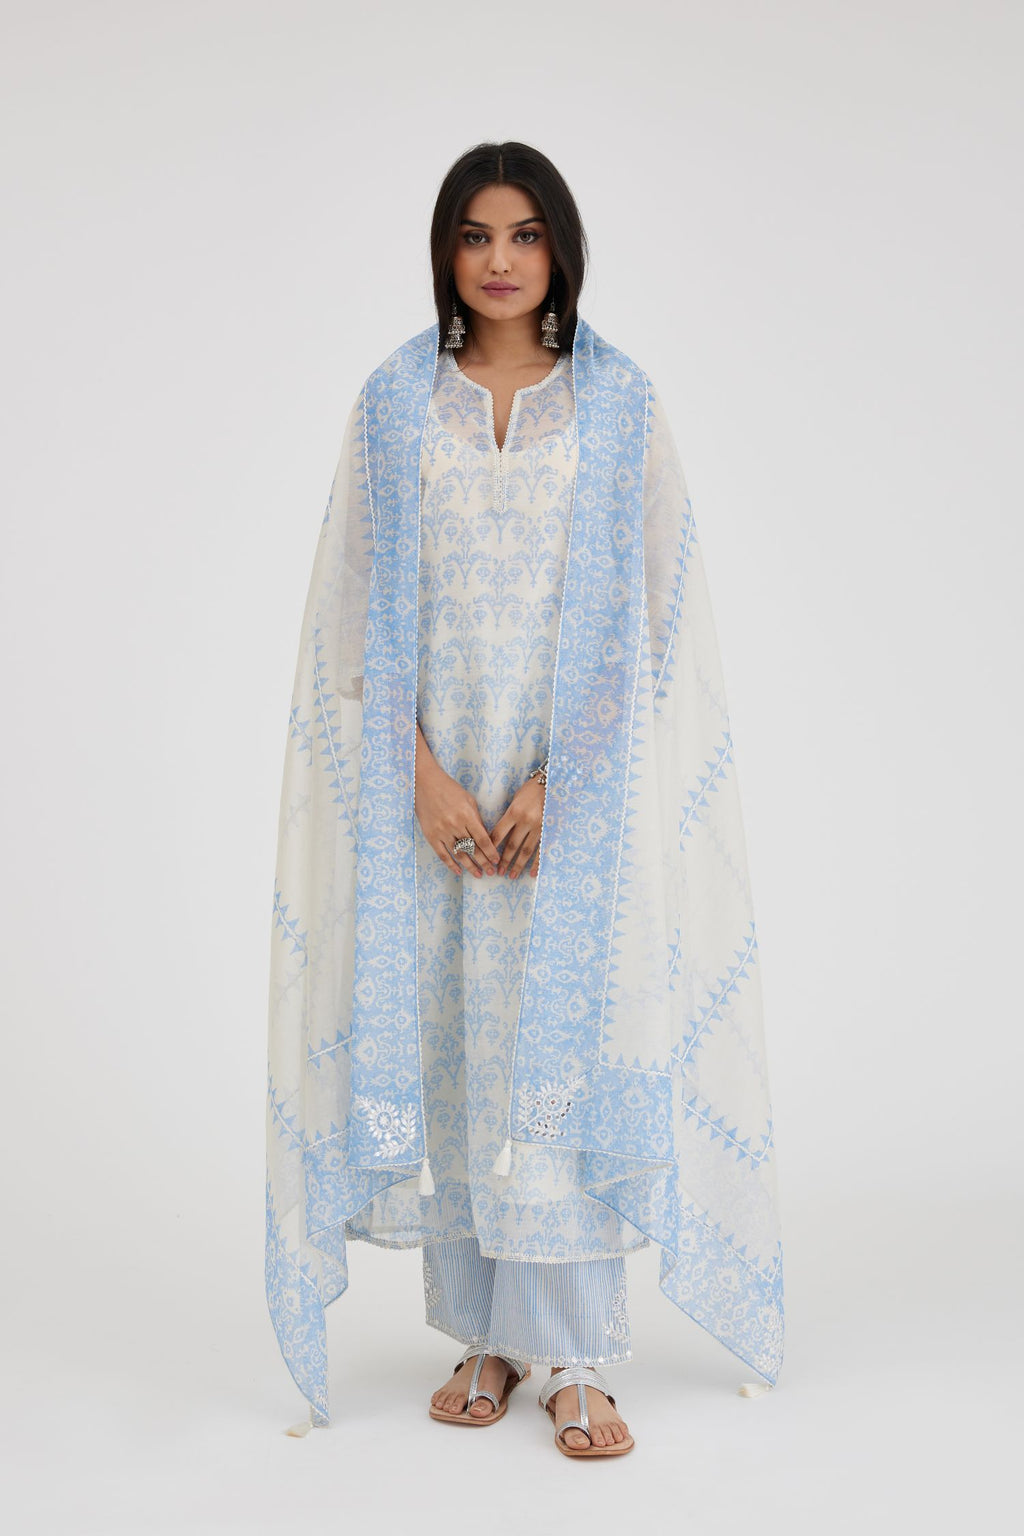 Ikat design blue and off white hand block-printed Cotton Chanderi straight long kurta set with off-white thread embroidery.